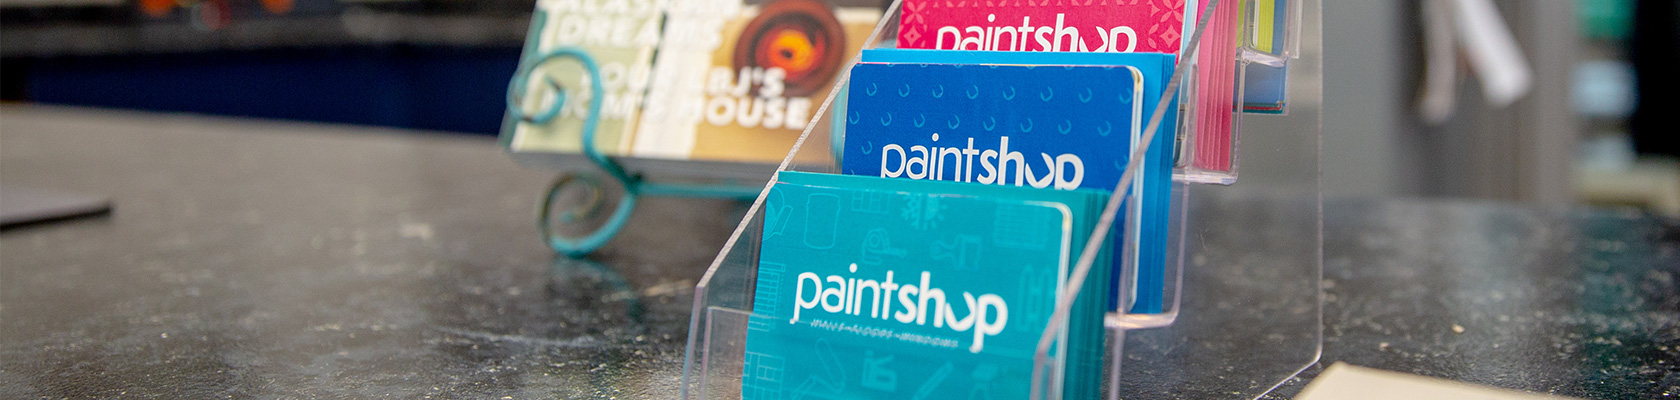 image of paint shop gift card